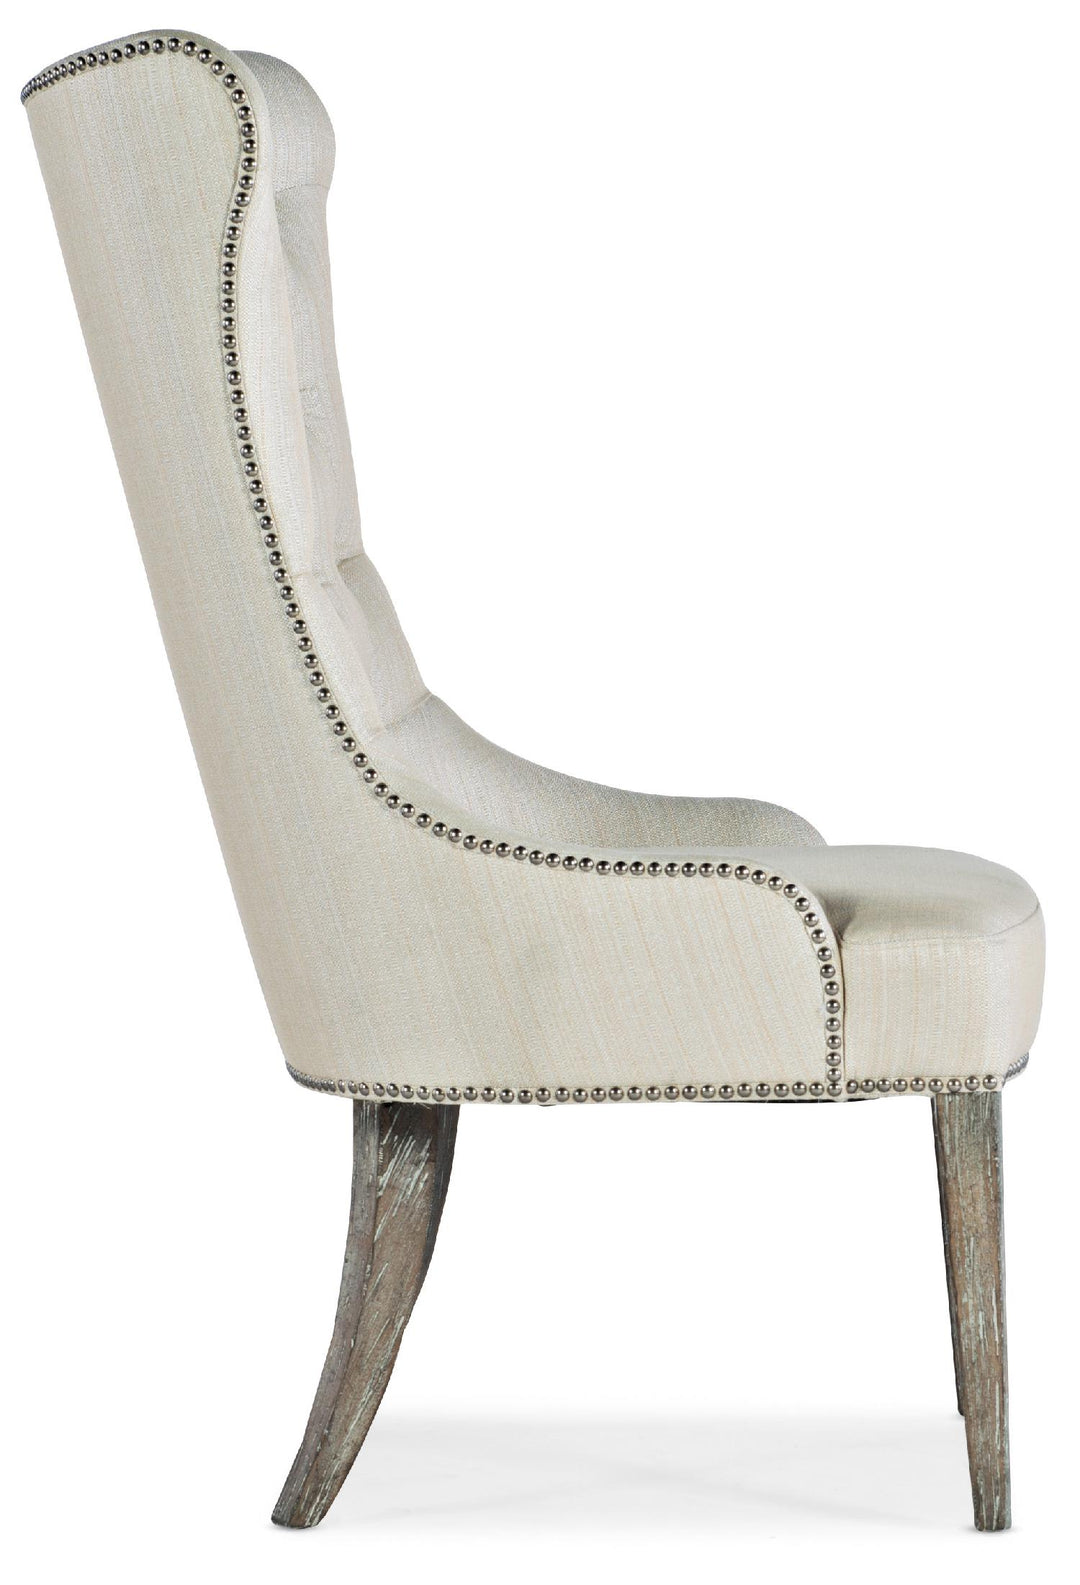 American Home Furniture | Hooker Furniture - Sanctuary Hostesse Upholstered Chair - Set of 2